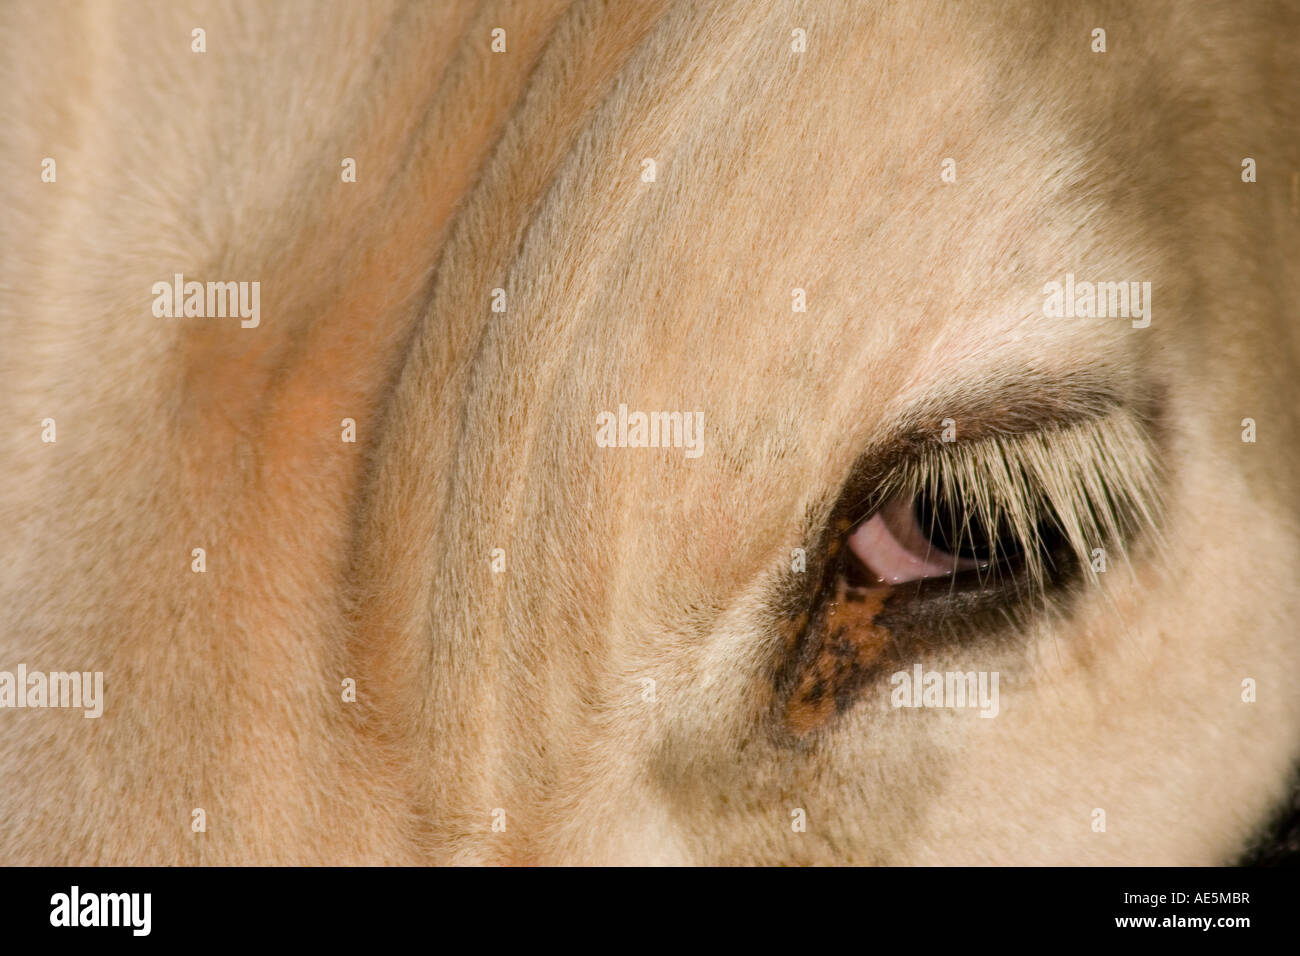 Closeup of the eye and forehead of a blond cow looking deep in thought Stock Photo